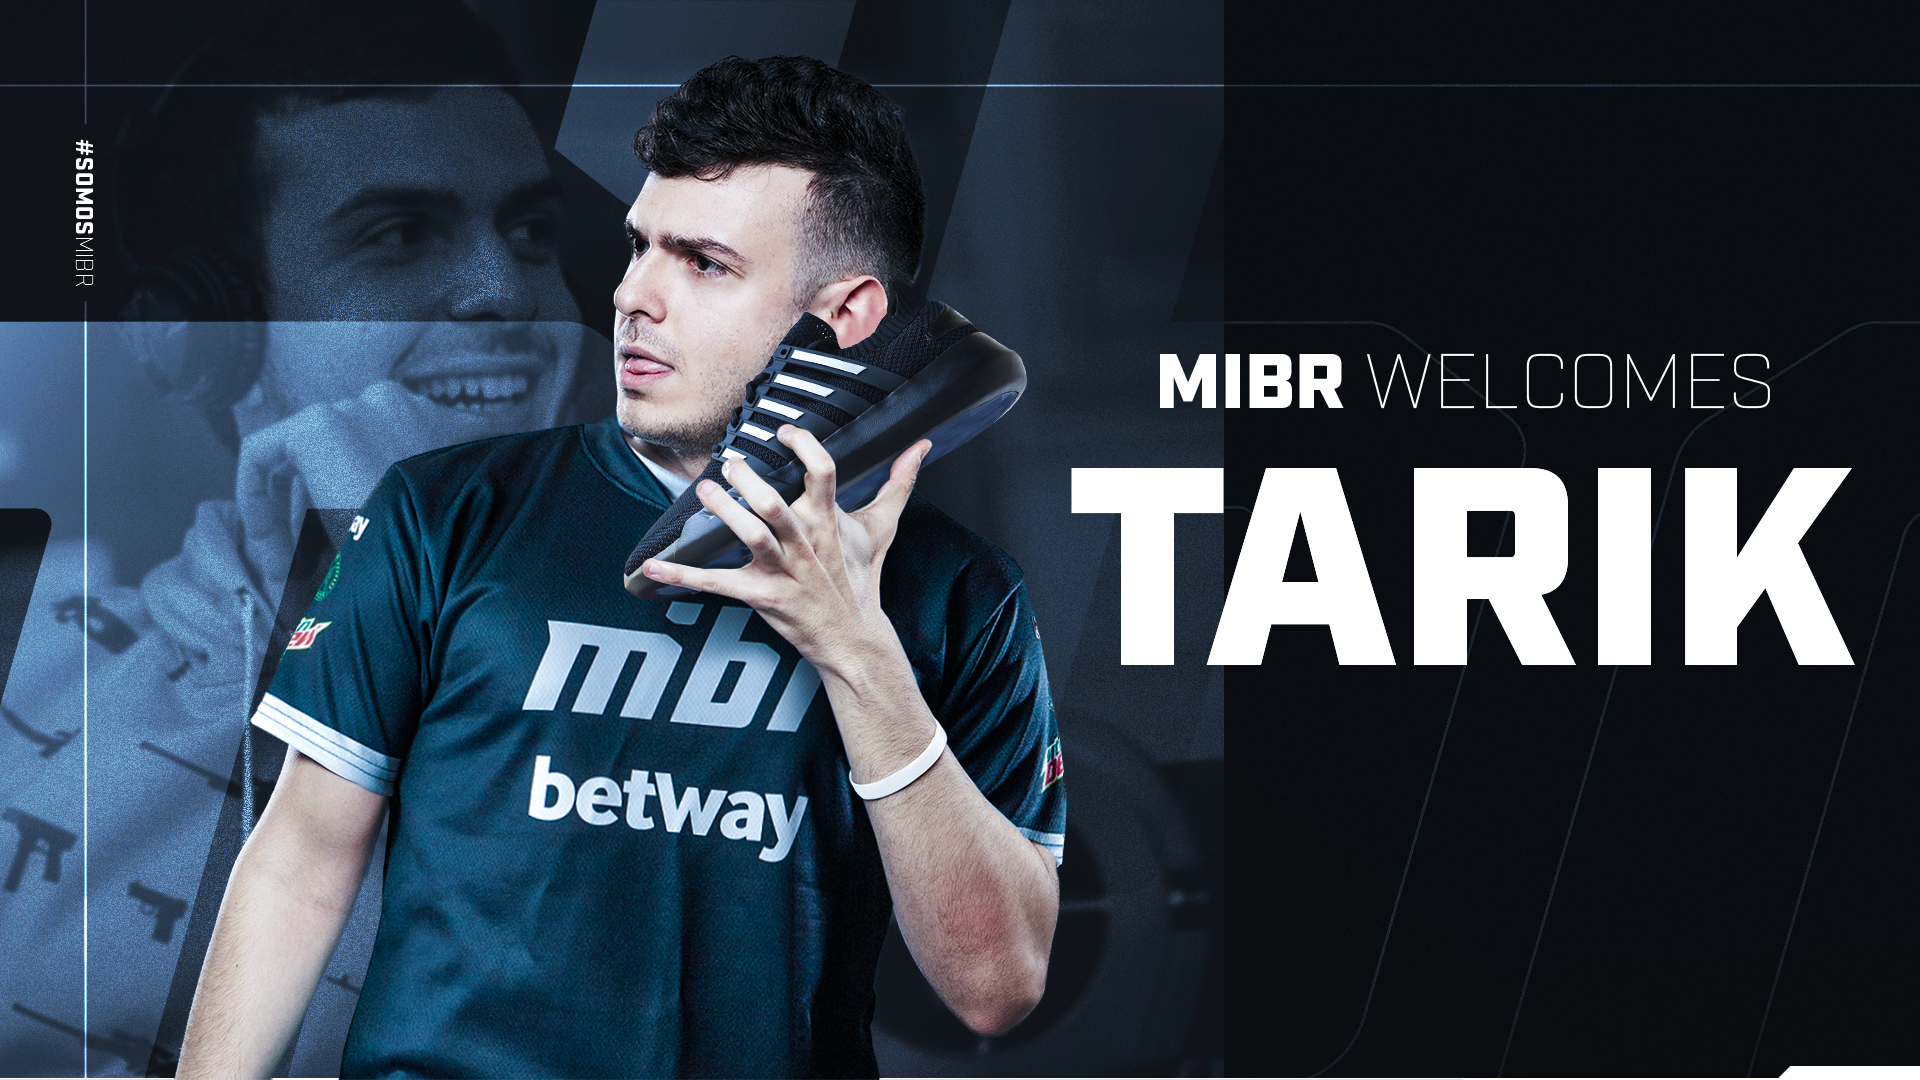 MIBR has announced its roster for the new season. CS:GO news - eSports  events review, analytics, announcements, interviews, statistics - GTt9zmPhc